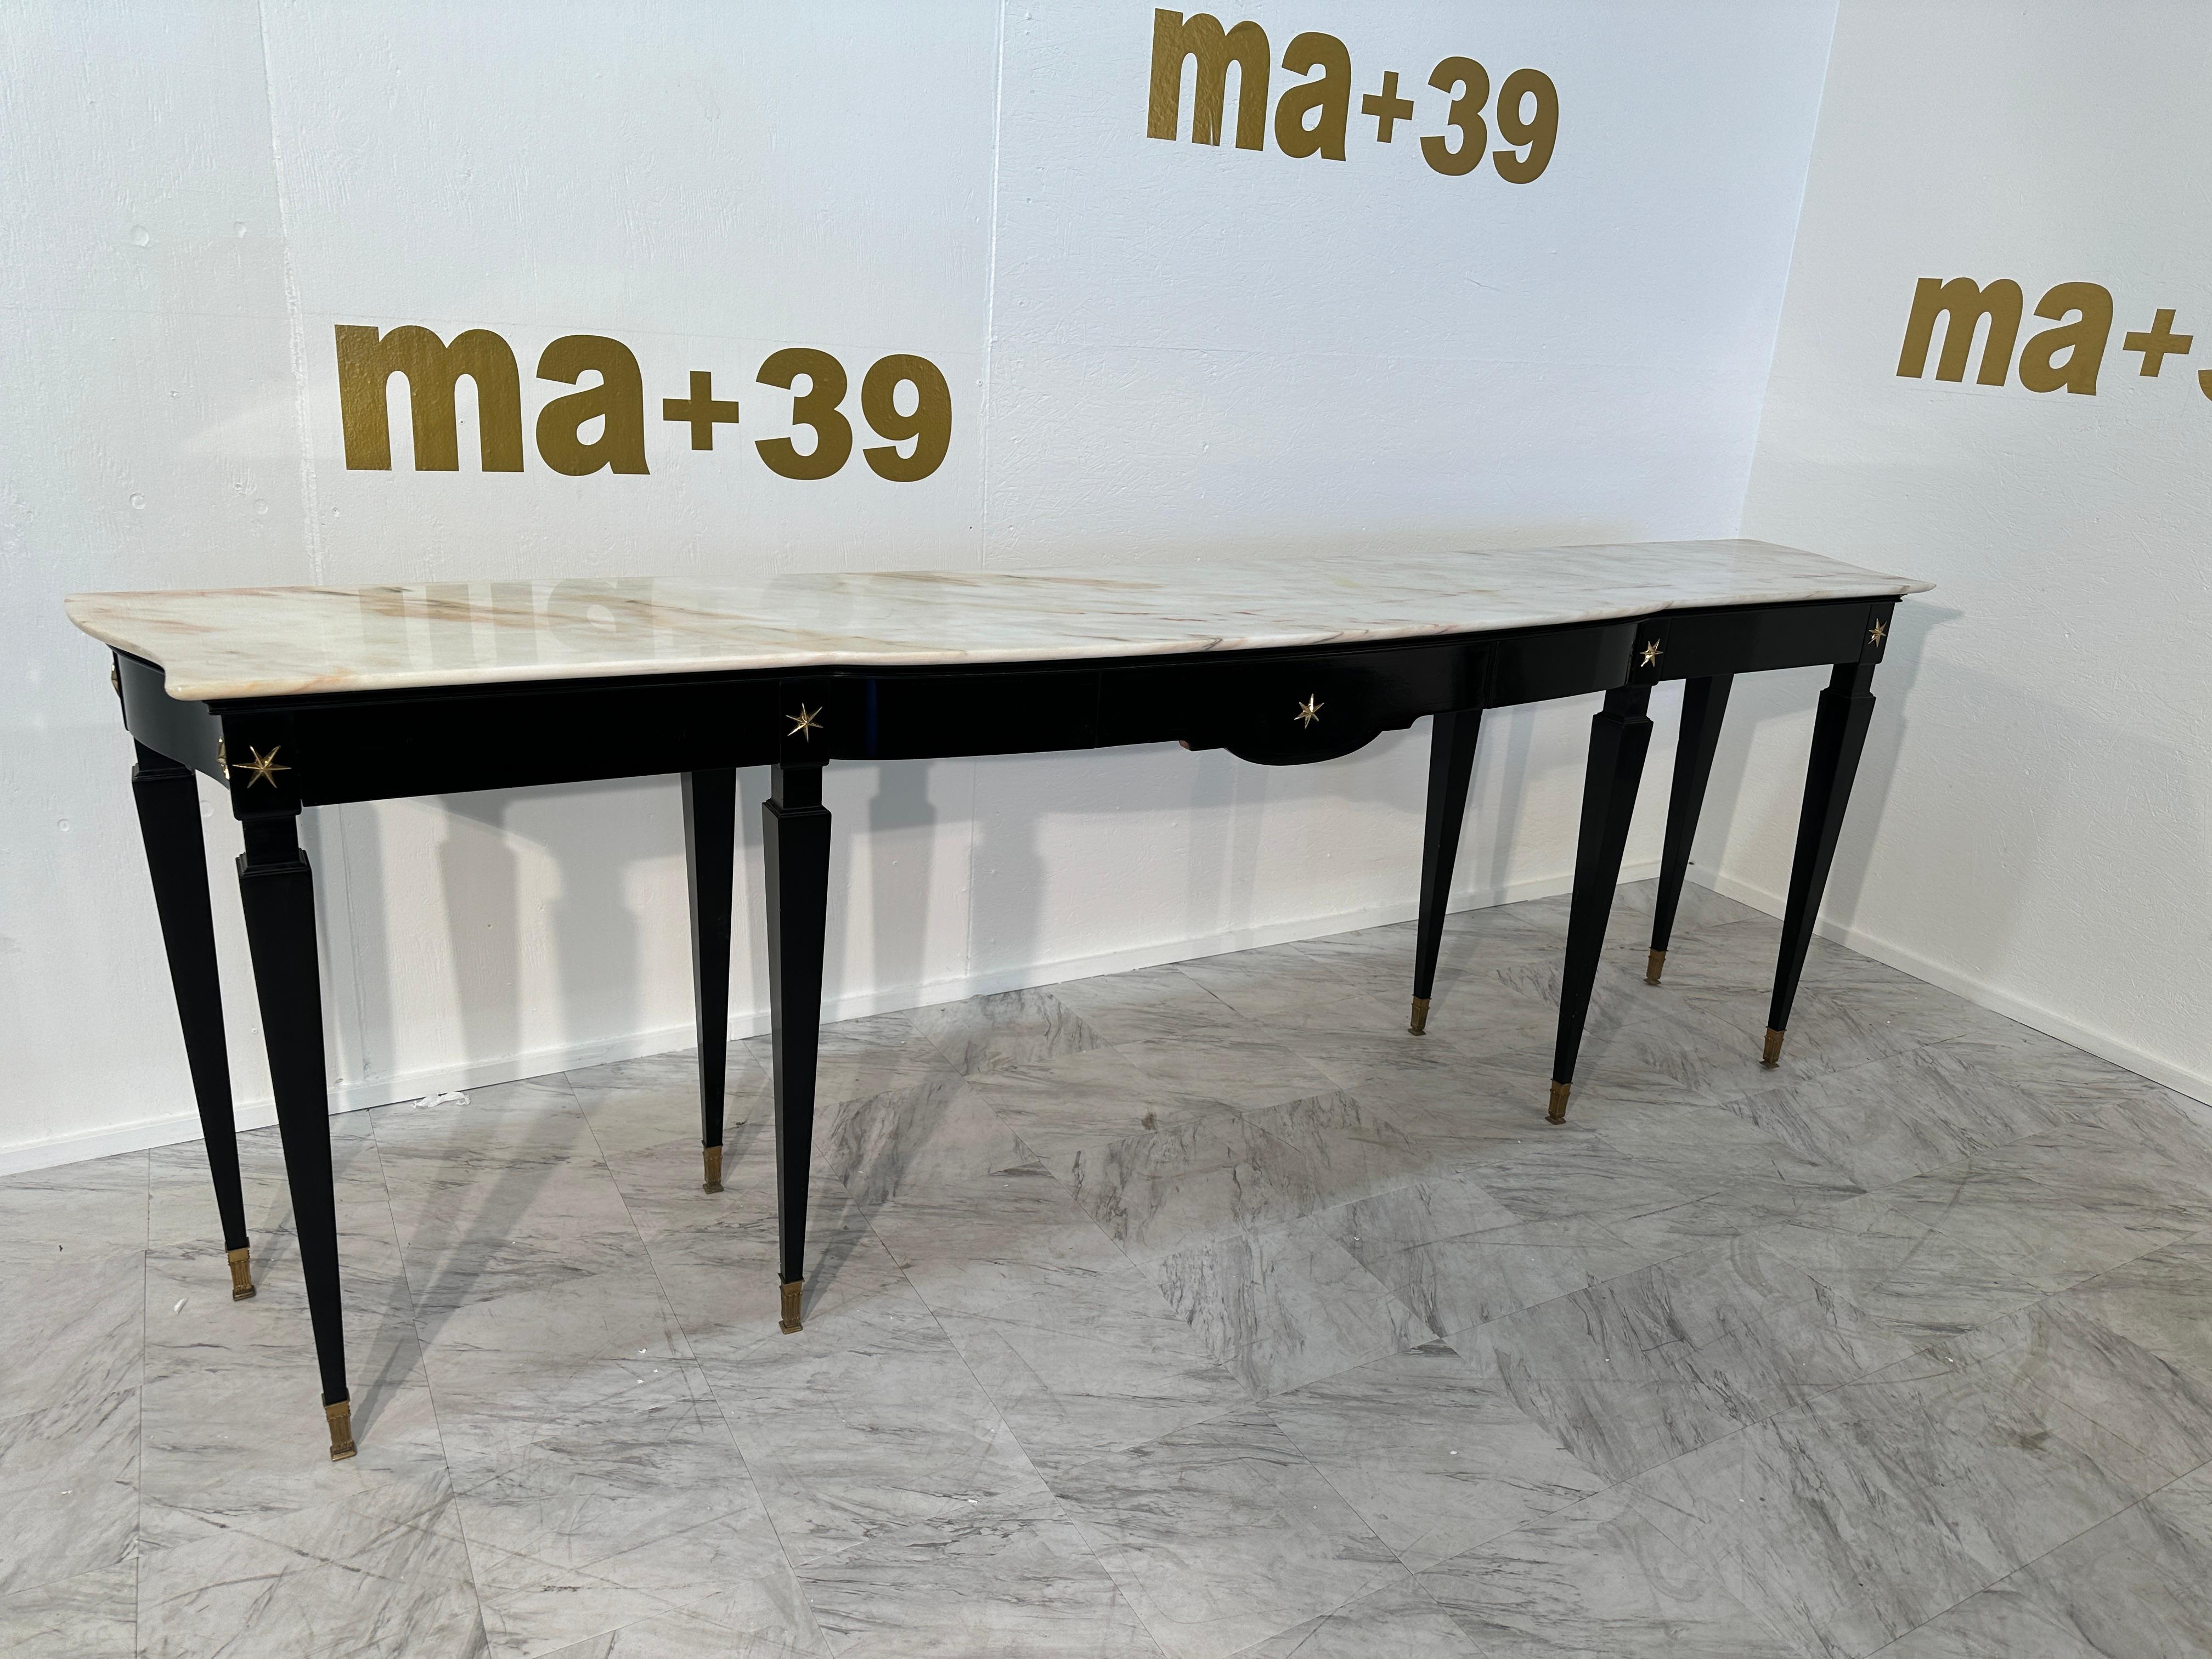 The Mid Century Italian Rosewood and Marble Console by Paolo Buffa, crafted in the 1950s, is an exquisite piece of furniture that exudes timeless elegance. Designed by the renowned Italian architect Paolo Buffa, this console features a lustrous